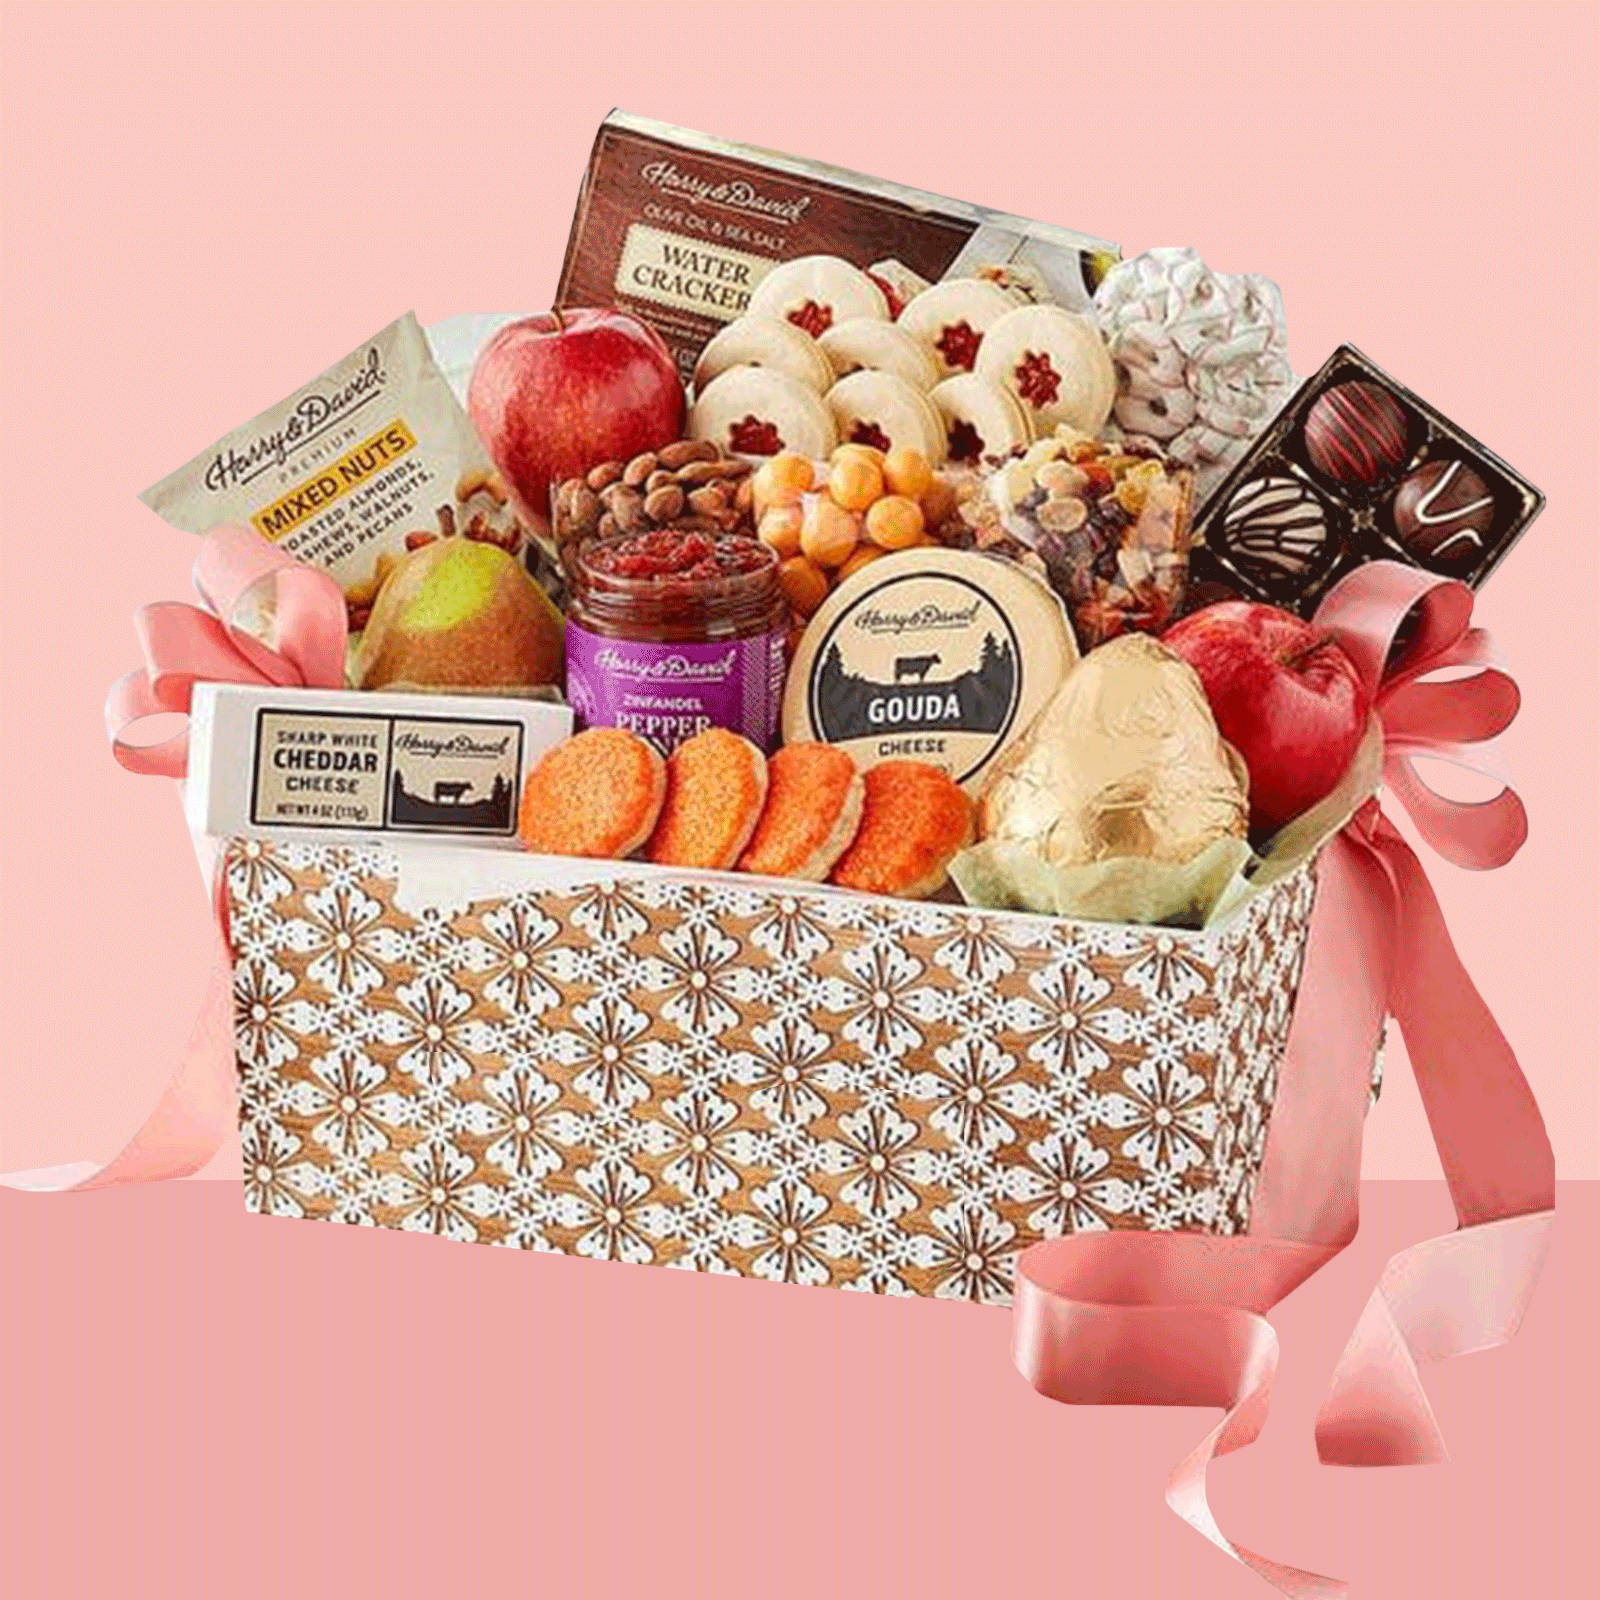 Animated GIF of Mother's Day baskets